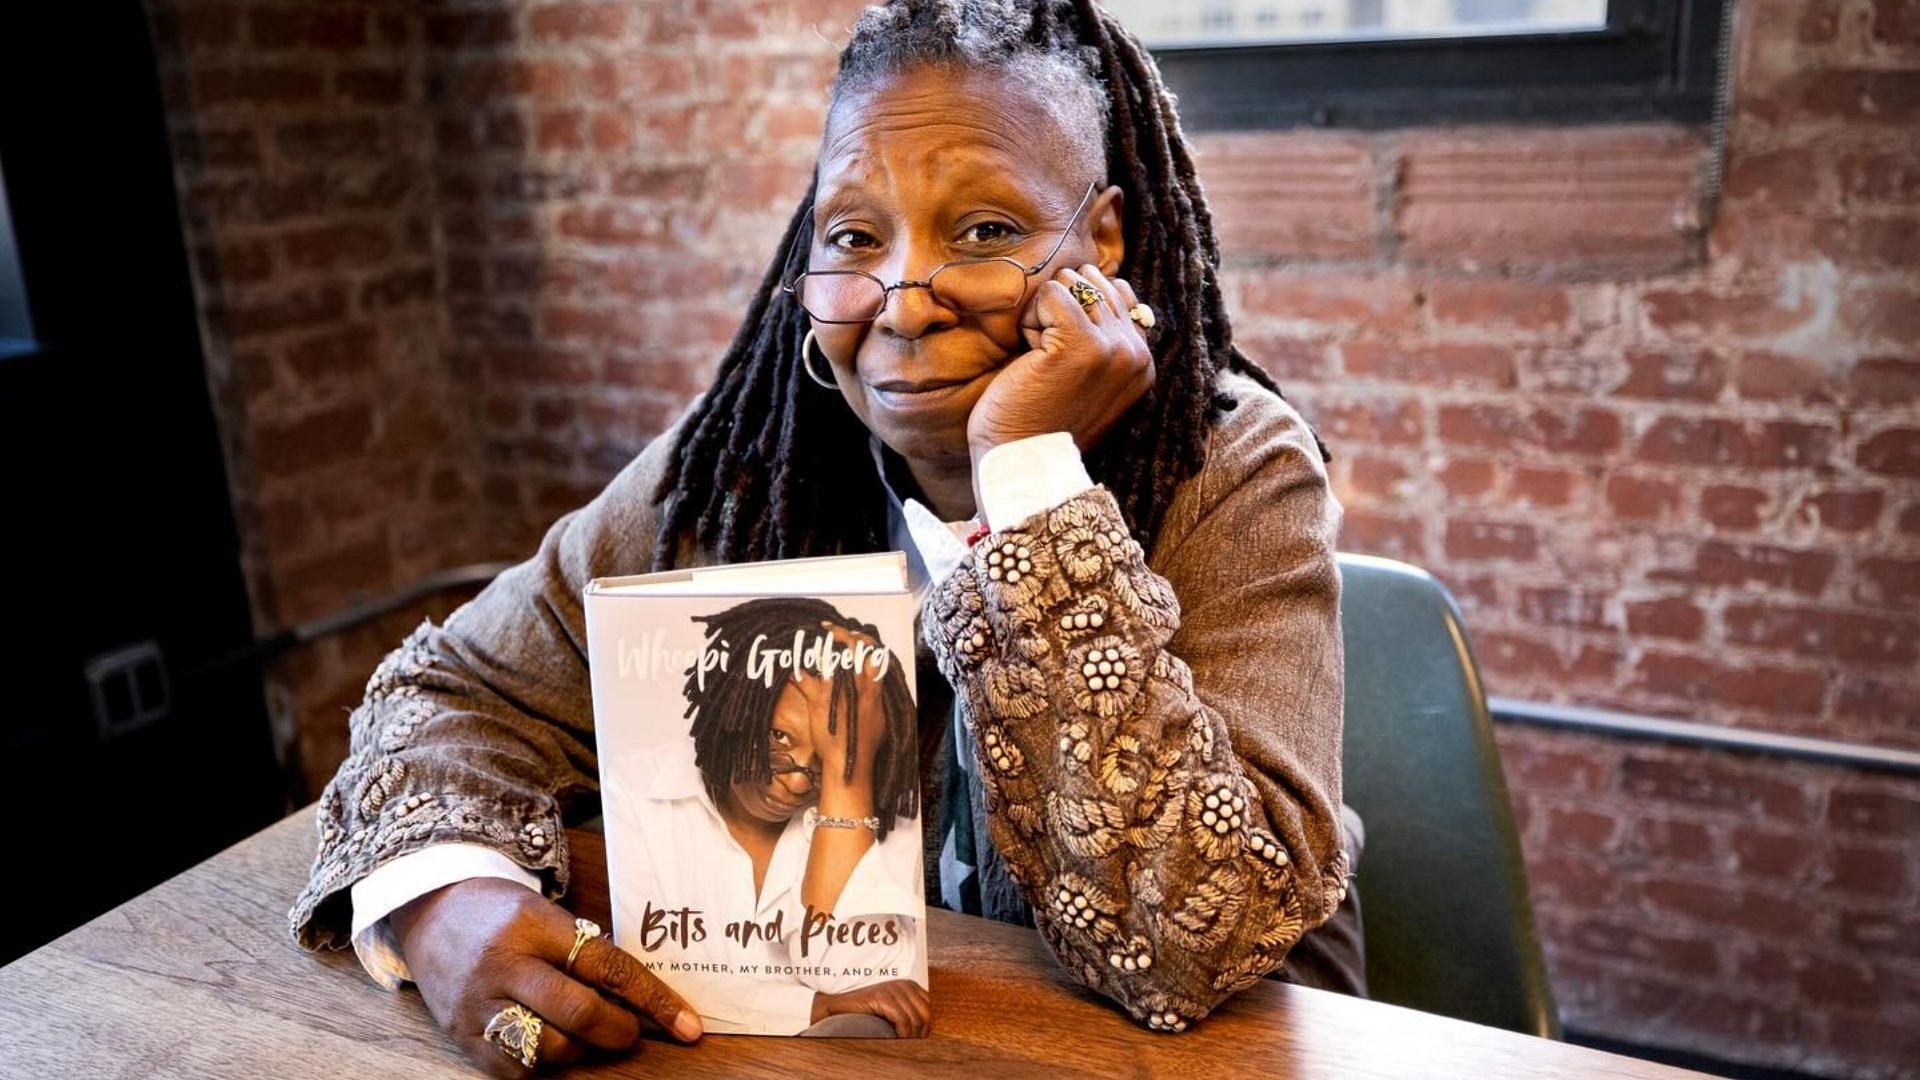 In her new memoir, Whoopi Goldberg recalled losing her first Oscar nomination to Geraldine Page, who she admired (Image via Instagram/@whoopigoldberg)